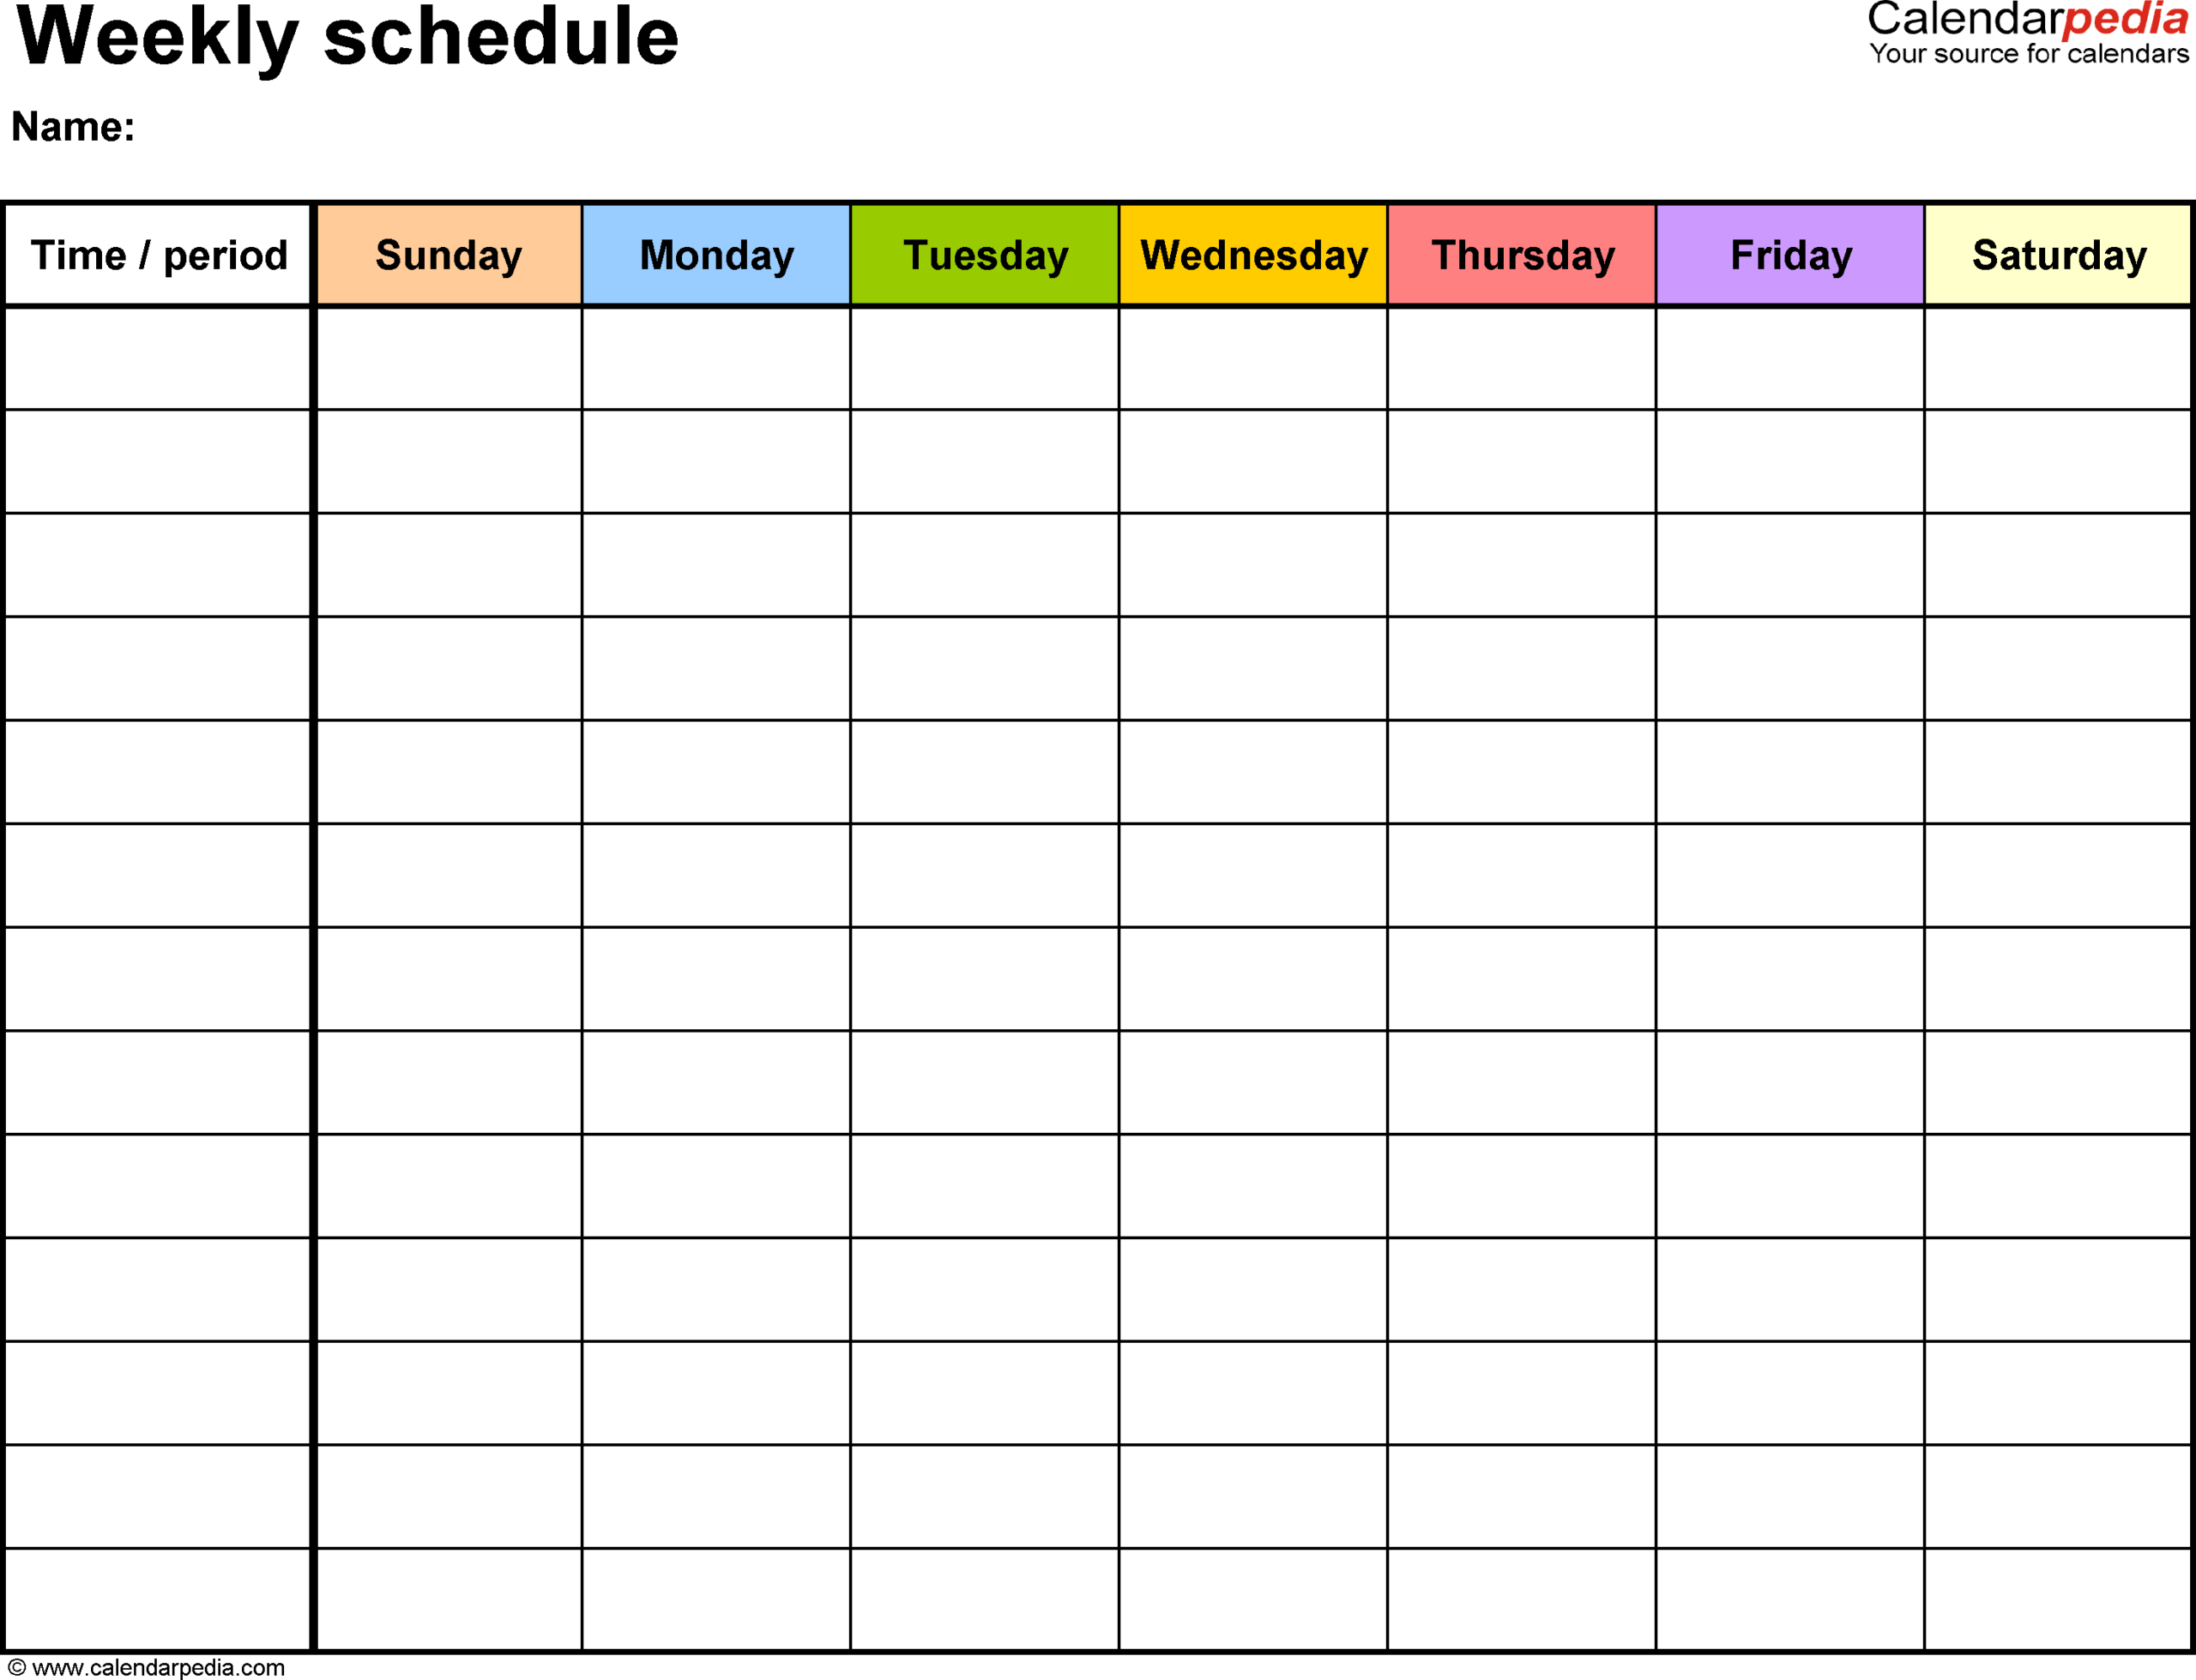 Free Weekly Schedule Templates For Excel - 18 Templates Within Blank Activity Calendar Template